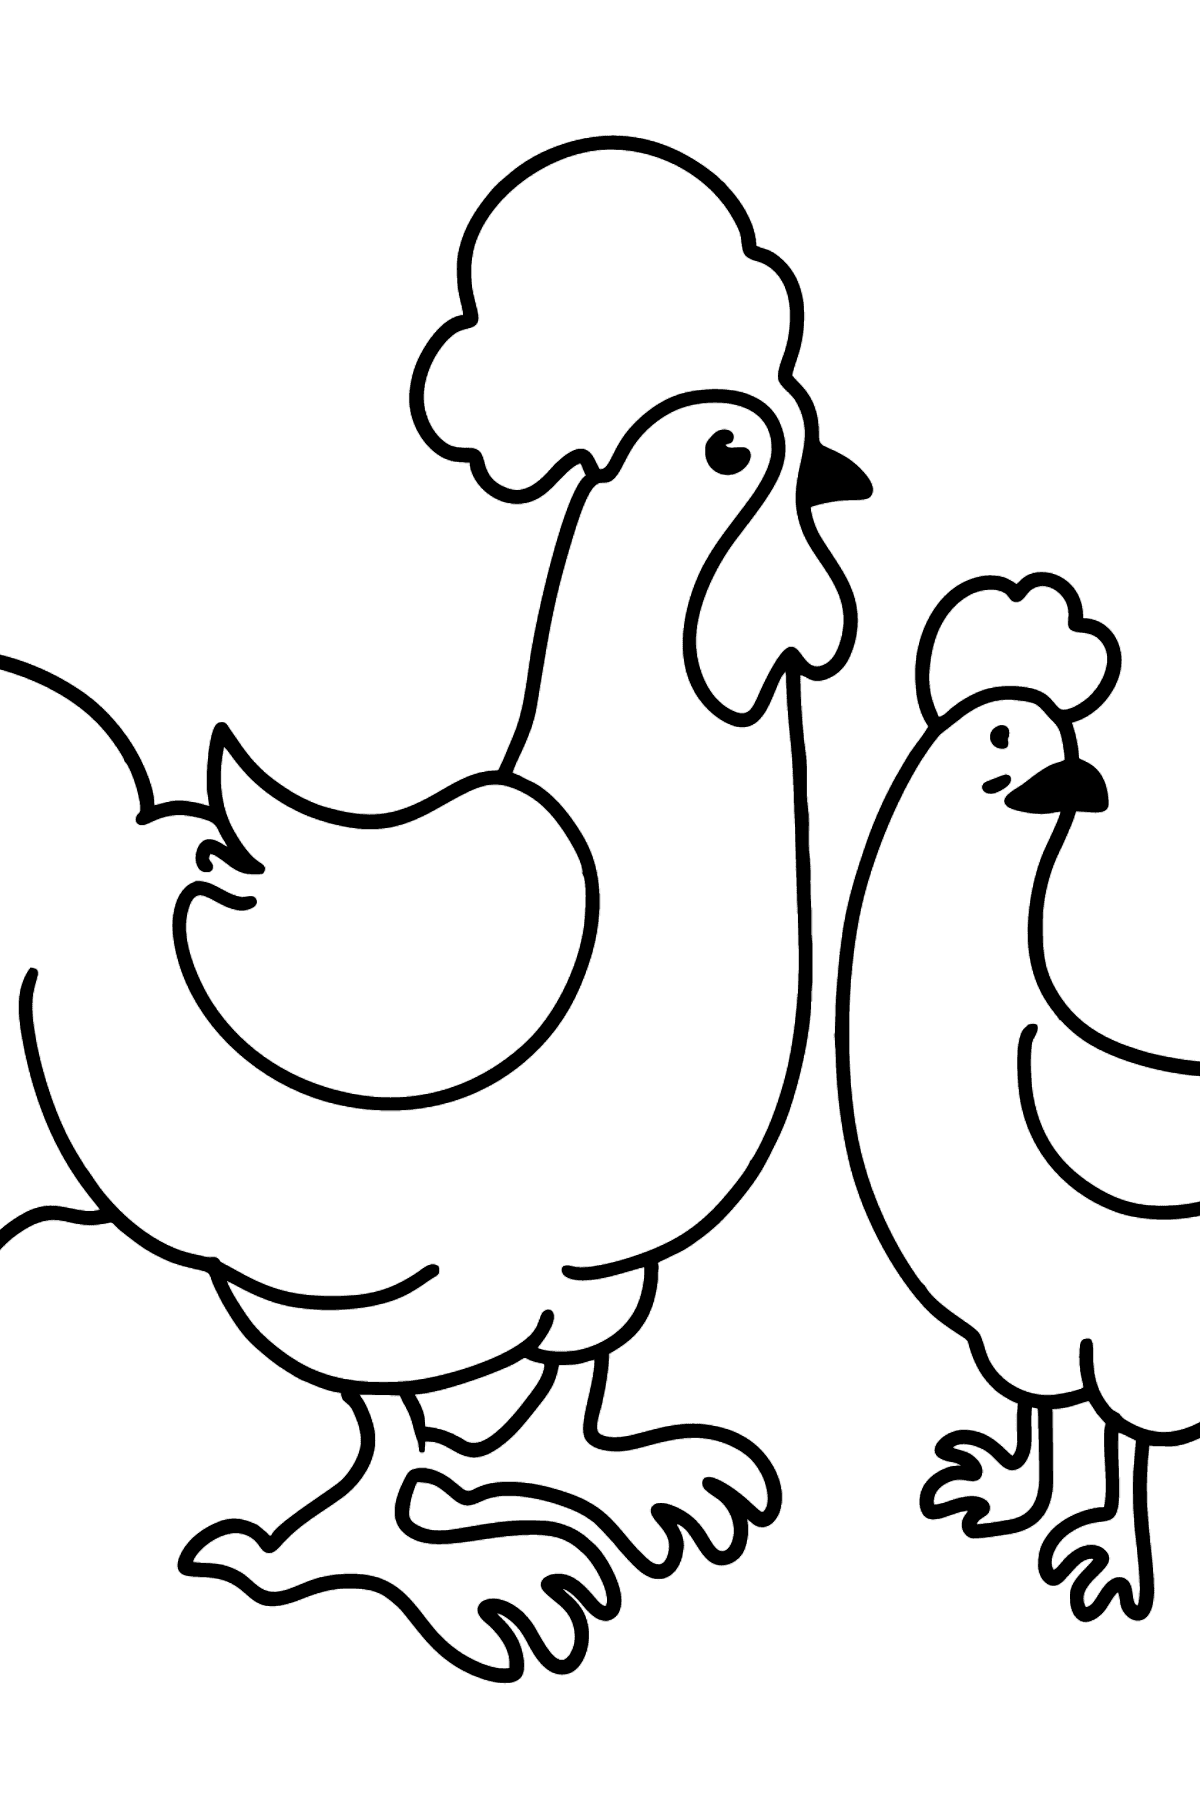 Rooster and Hen coloring page - Coloring Pages for Kids